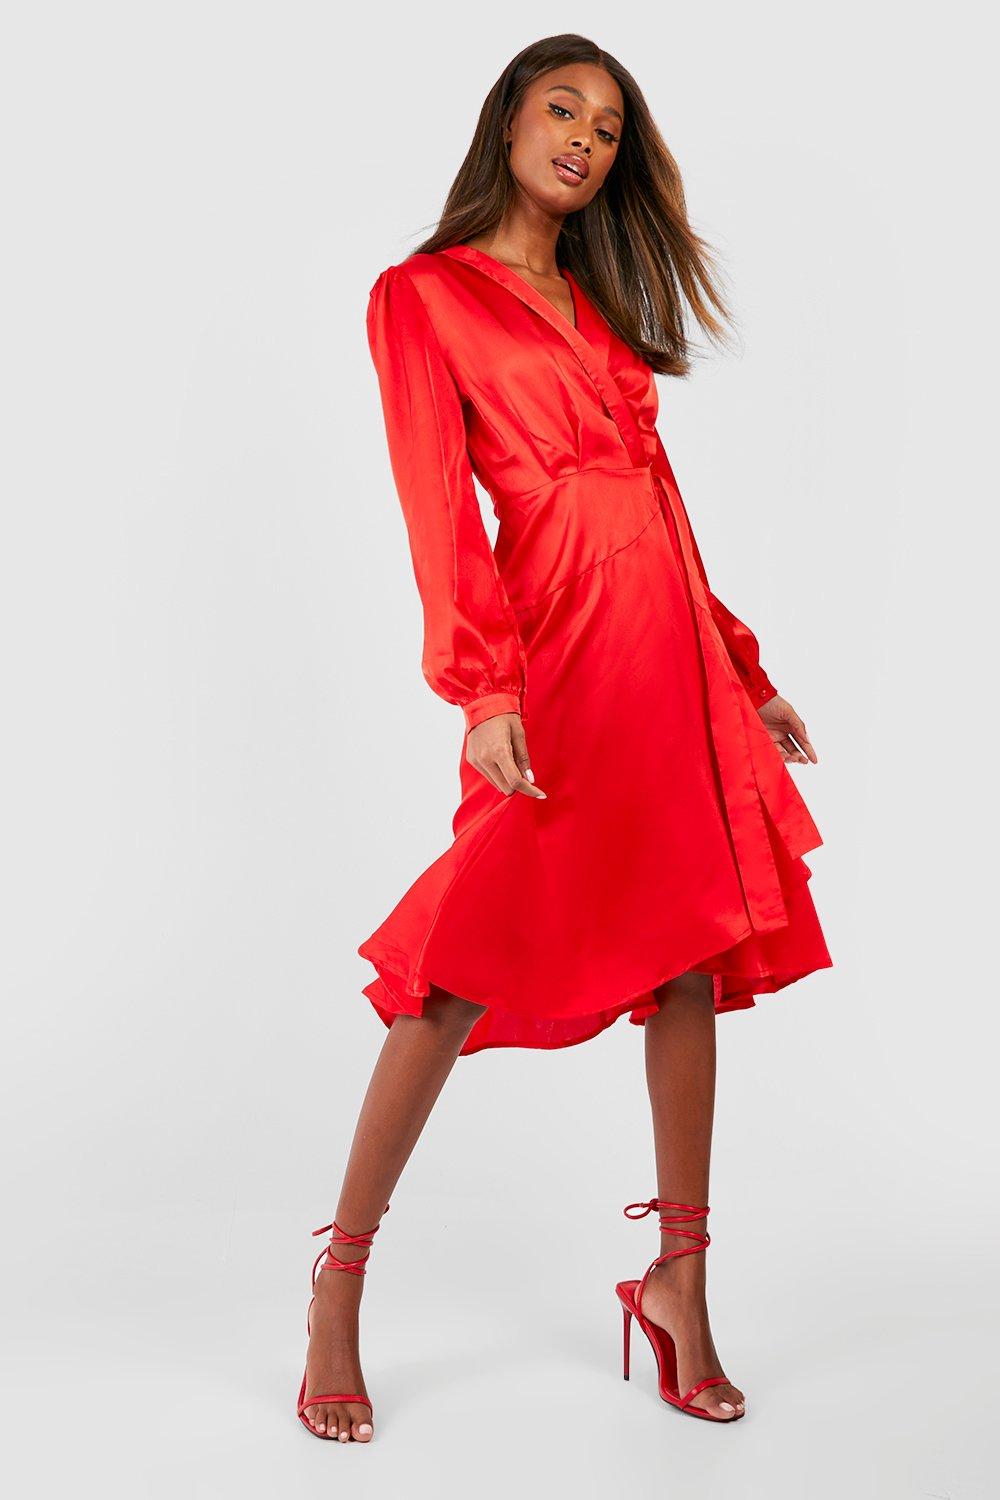 red going out dresses uk